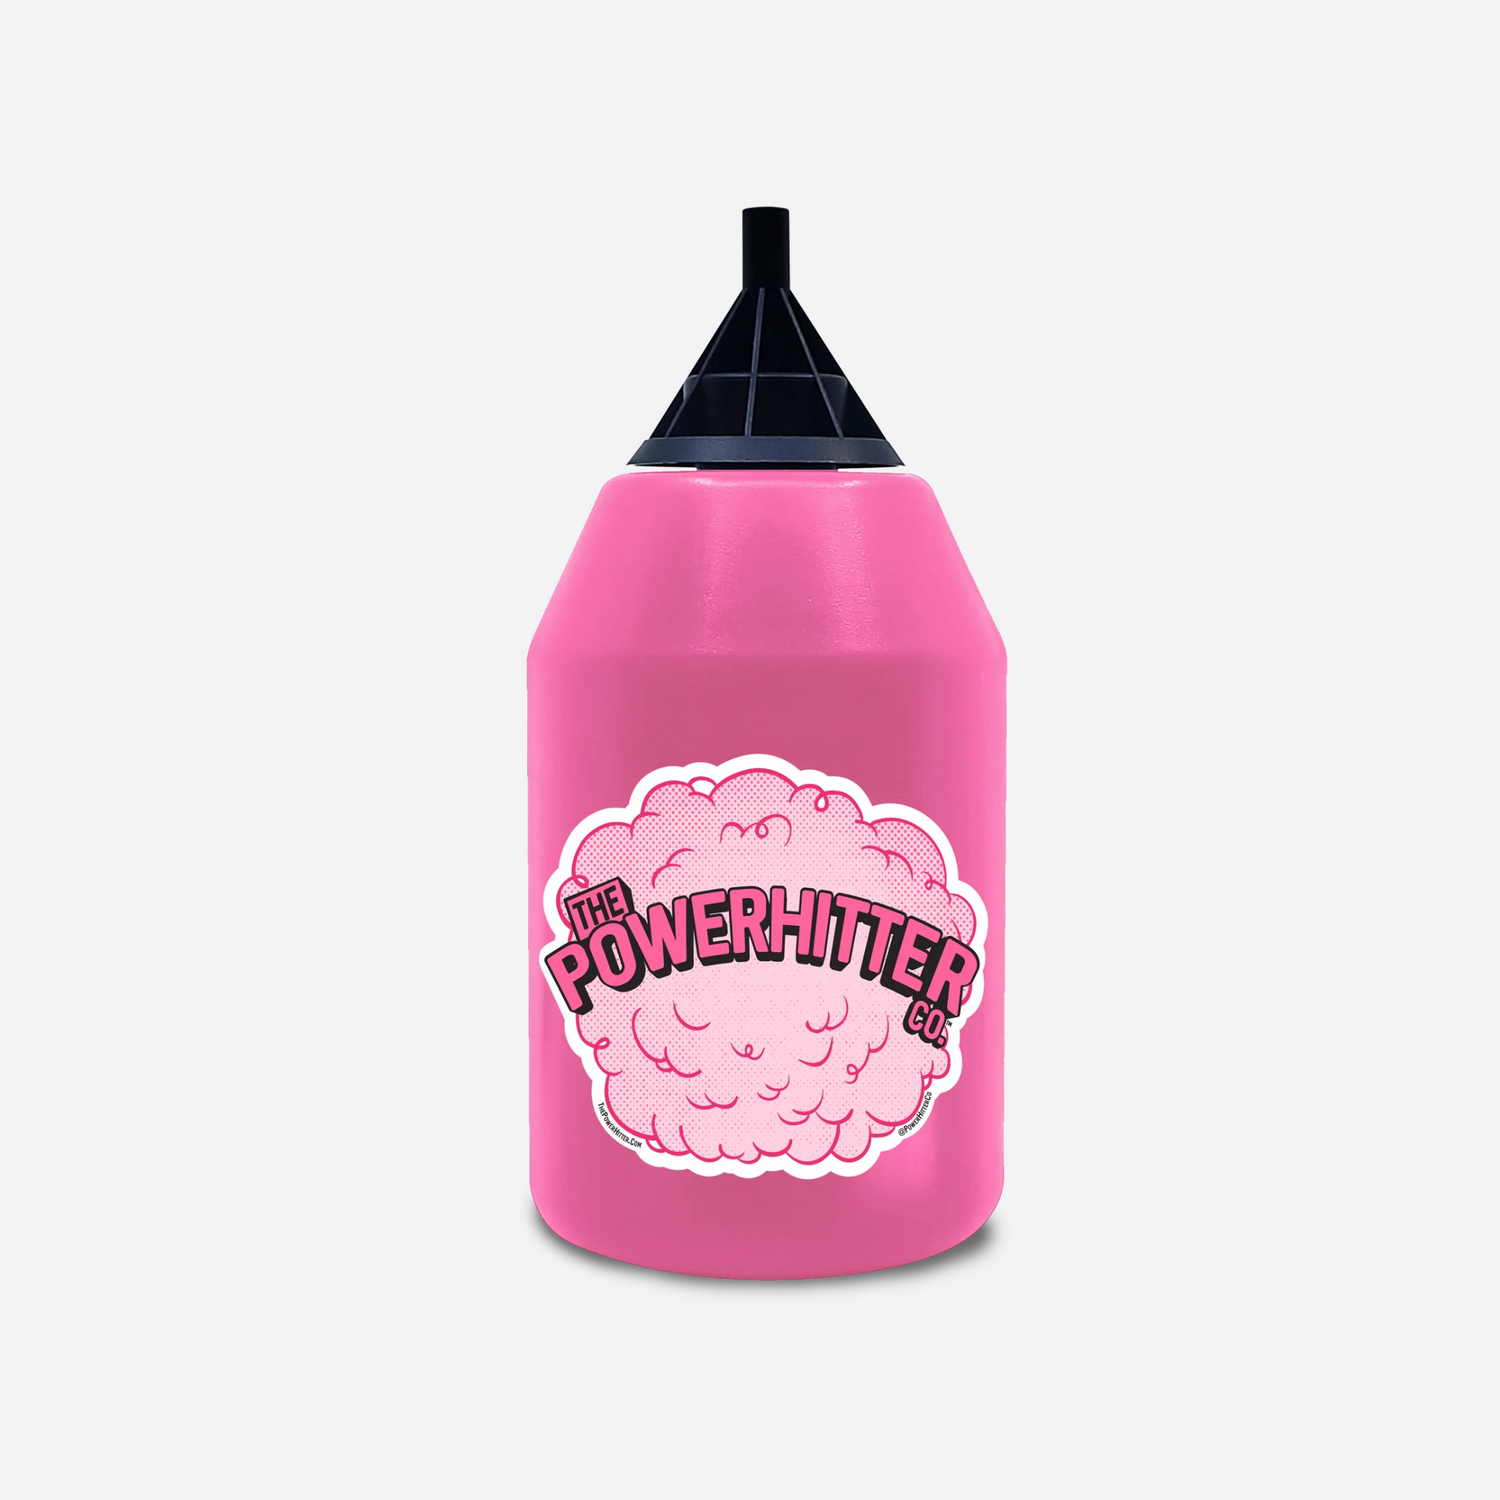 The Pink PowerHitter™, the genuine 50-year-old design for a classic smoking session.